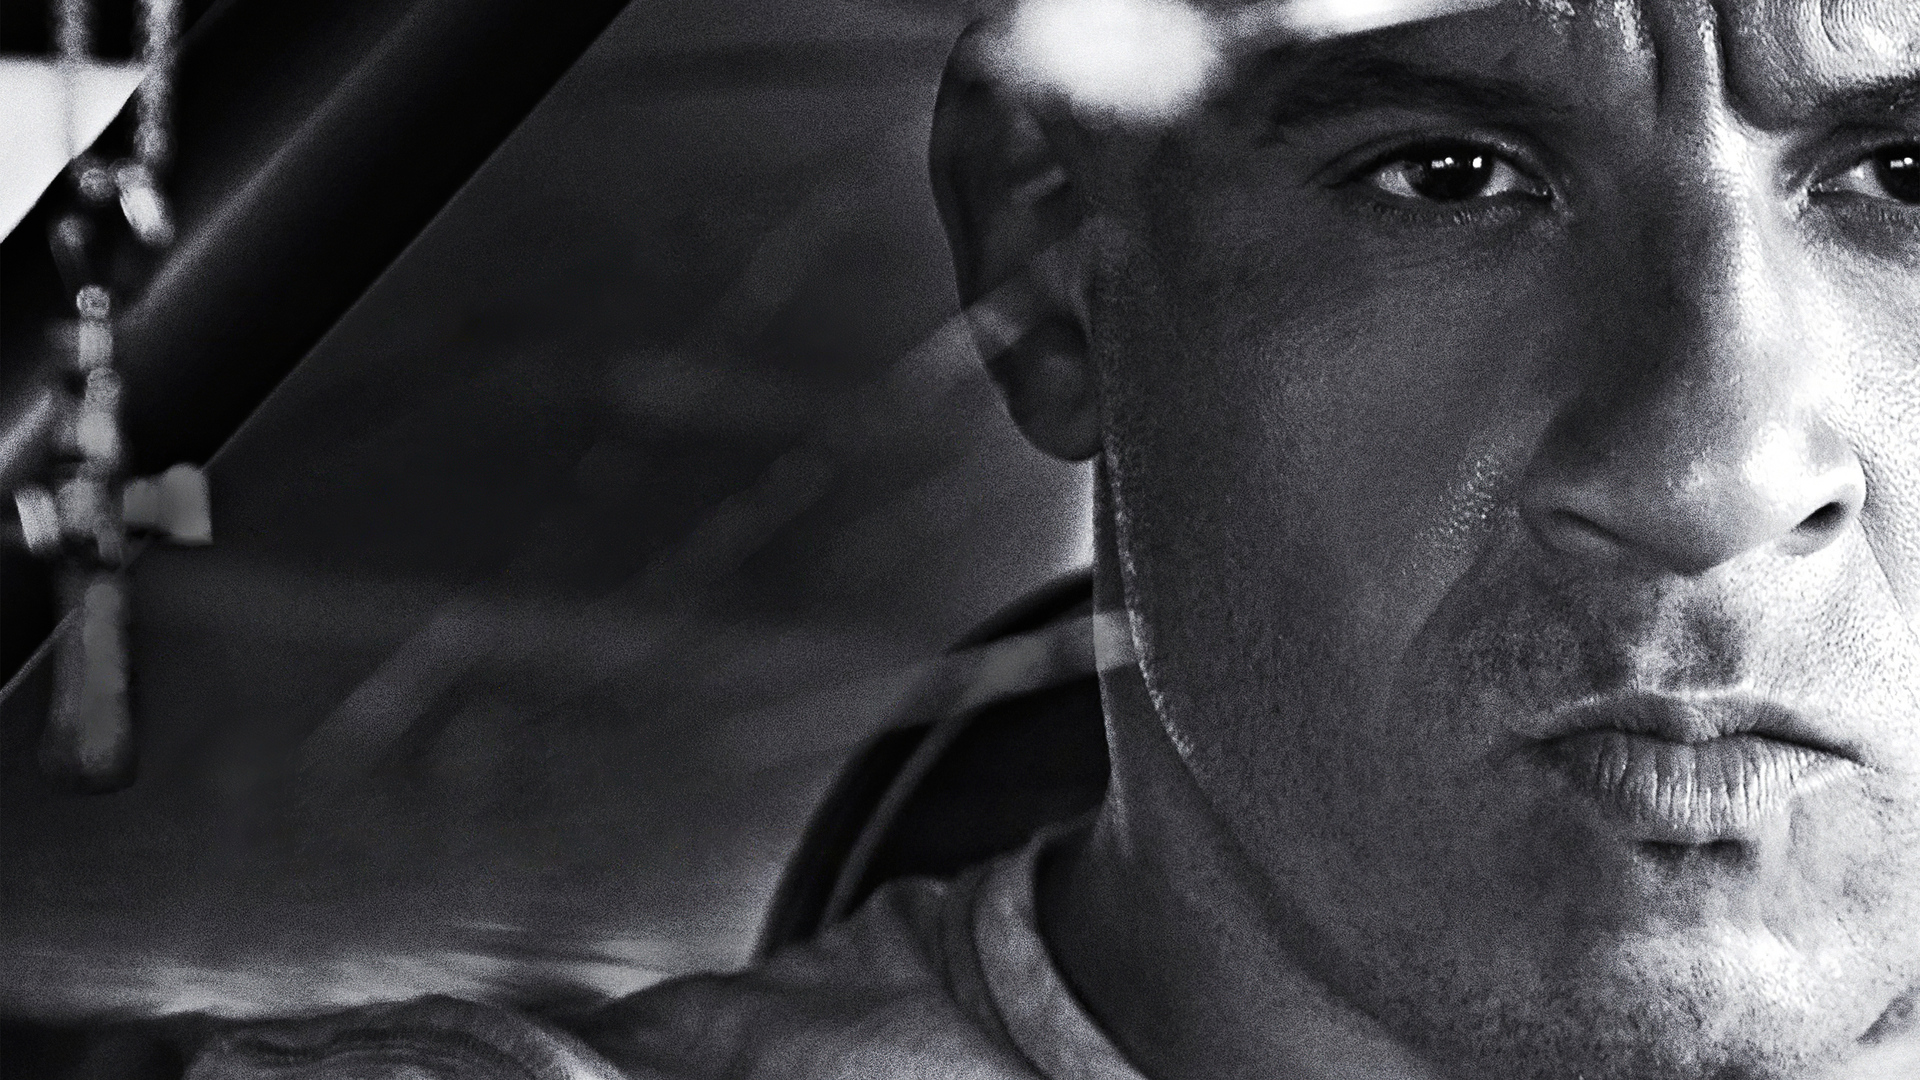 Movie Fast & Furious 9 HD Wallpaper | Background Image